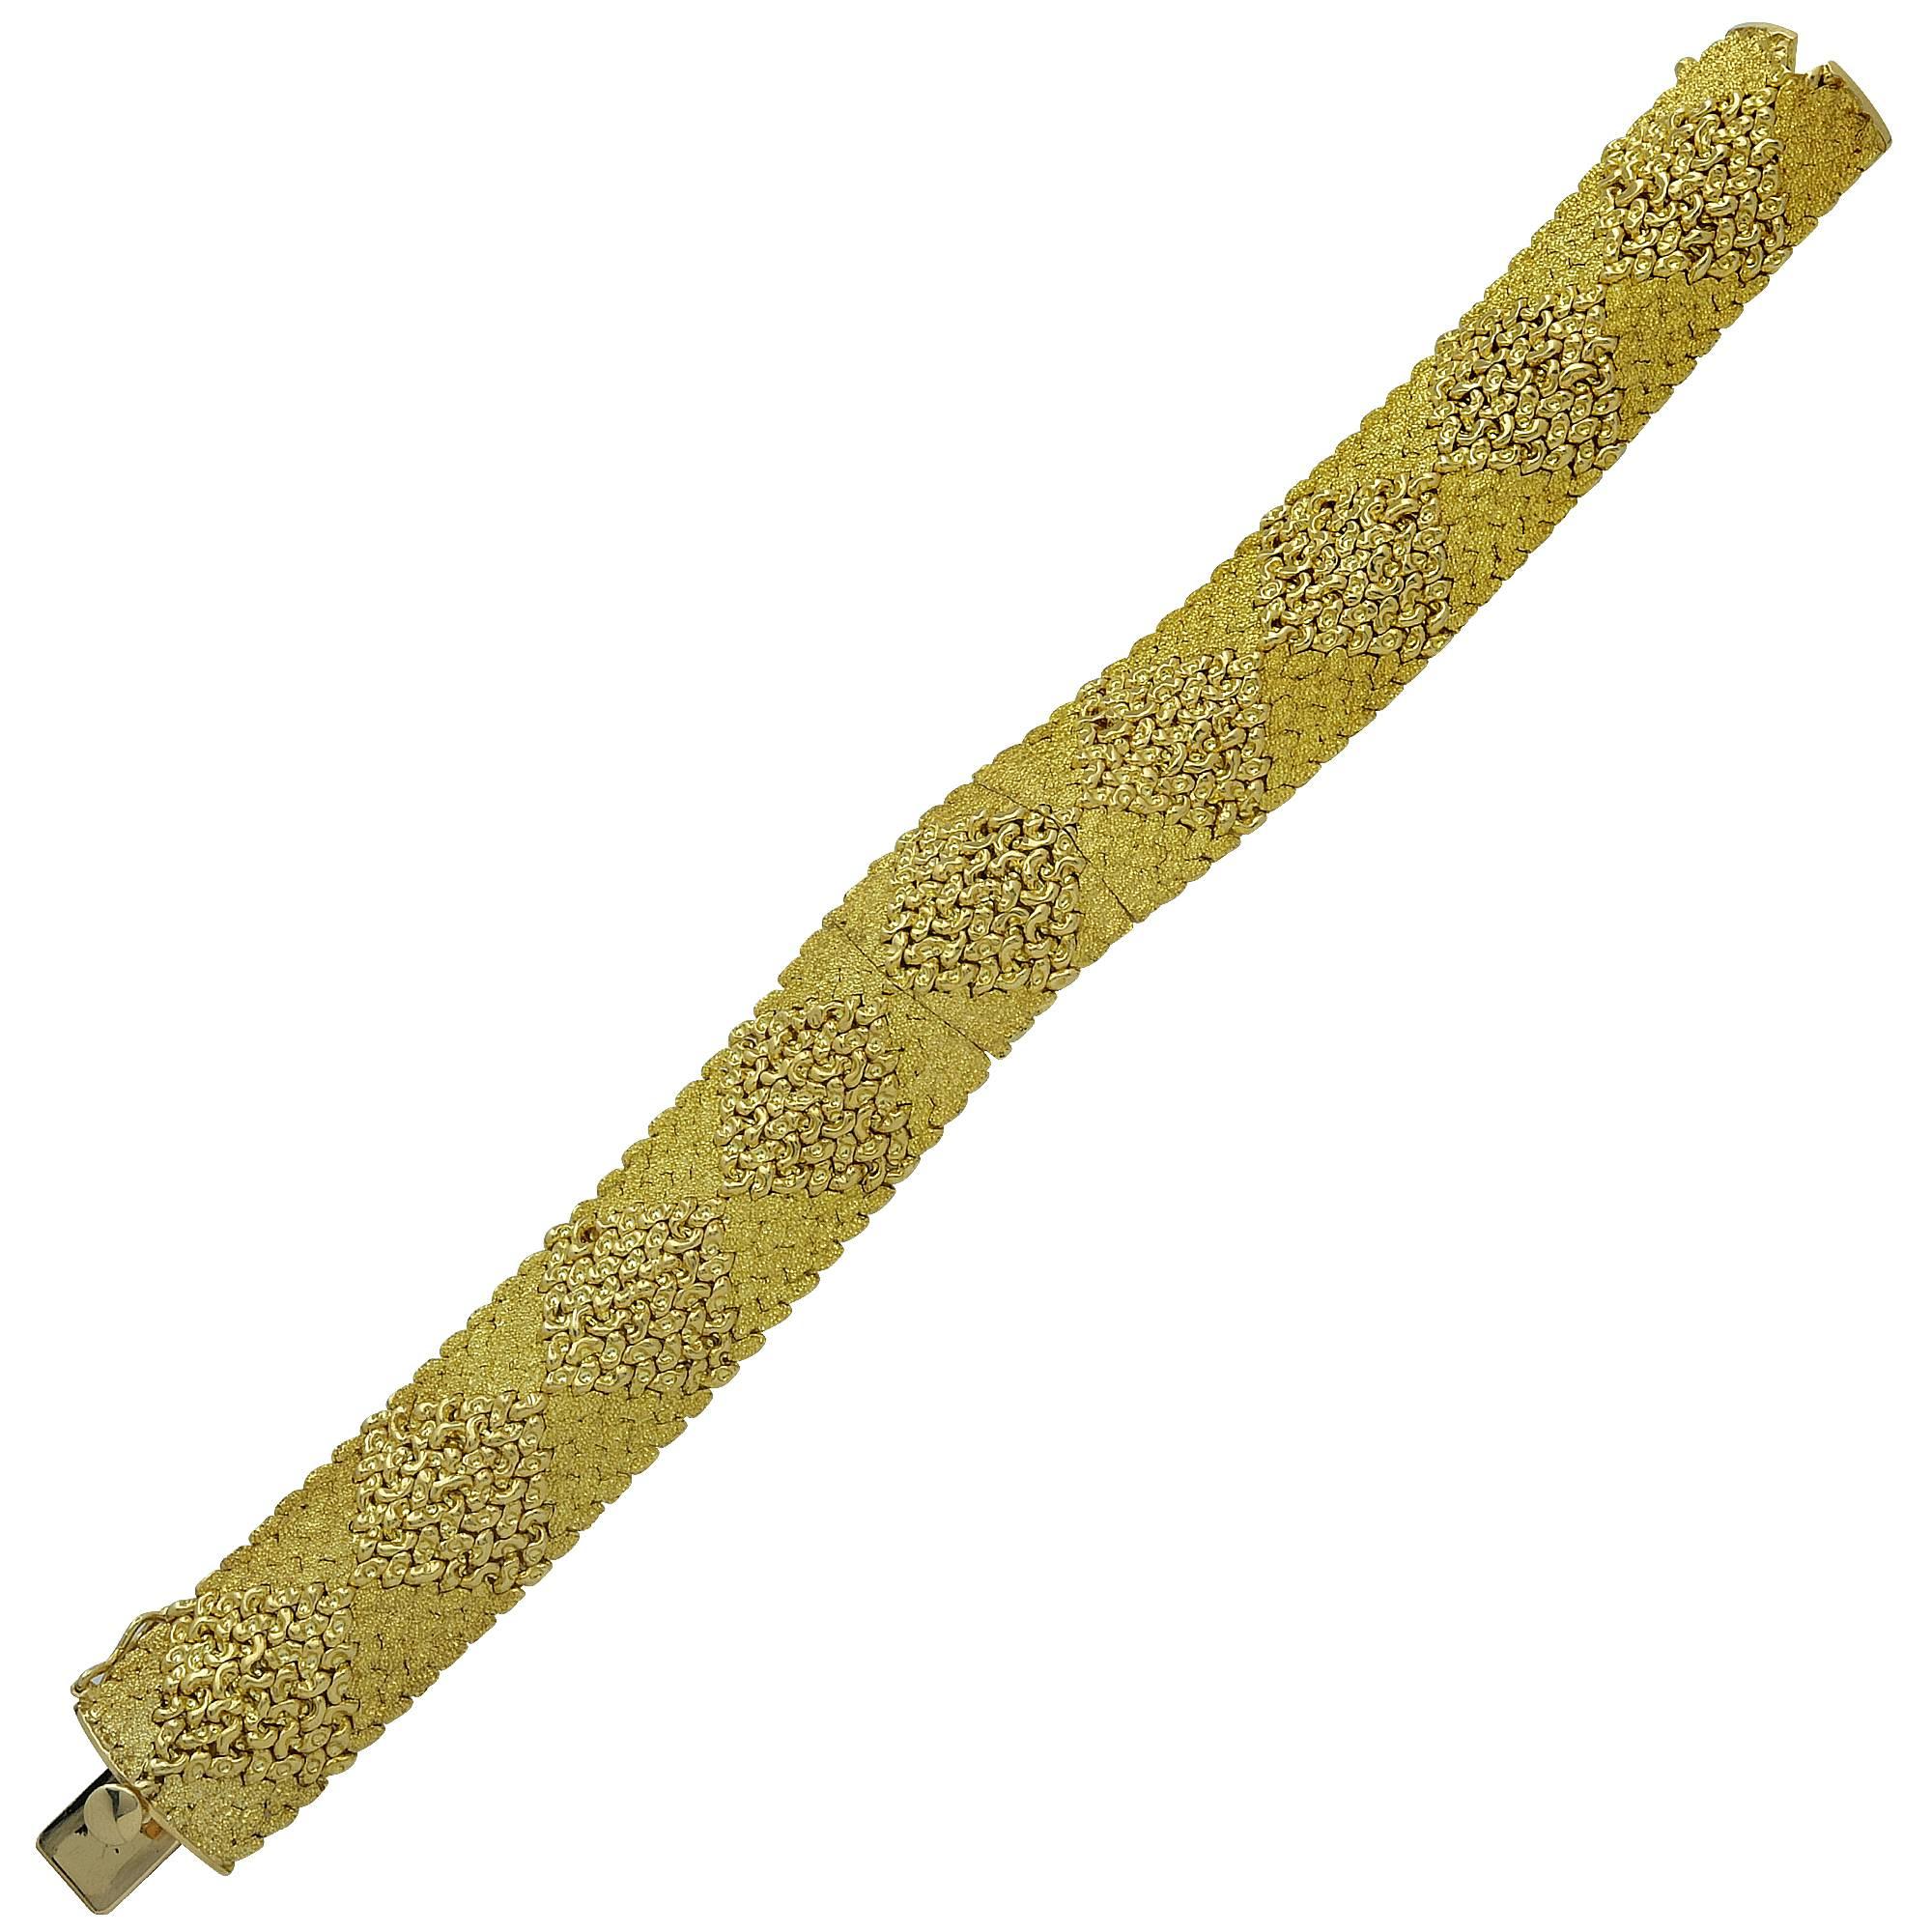 Fabulous 14k yellow gold satin and high polish finish interwoven hidden face watch.

This watch/bracelet will fit up to a 6.5 inch wrist and is .70 inches in width.
It is stamped and/or tested as 14k gold.
The metal weight is 60.66 grams.

This gold